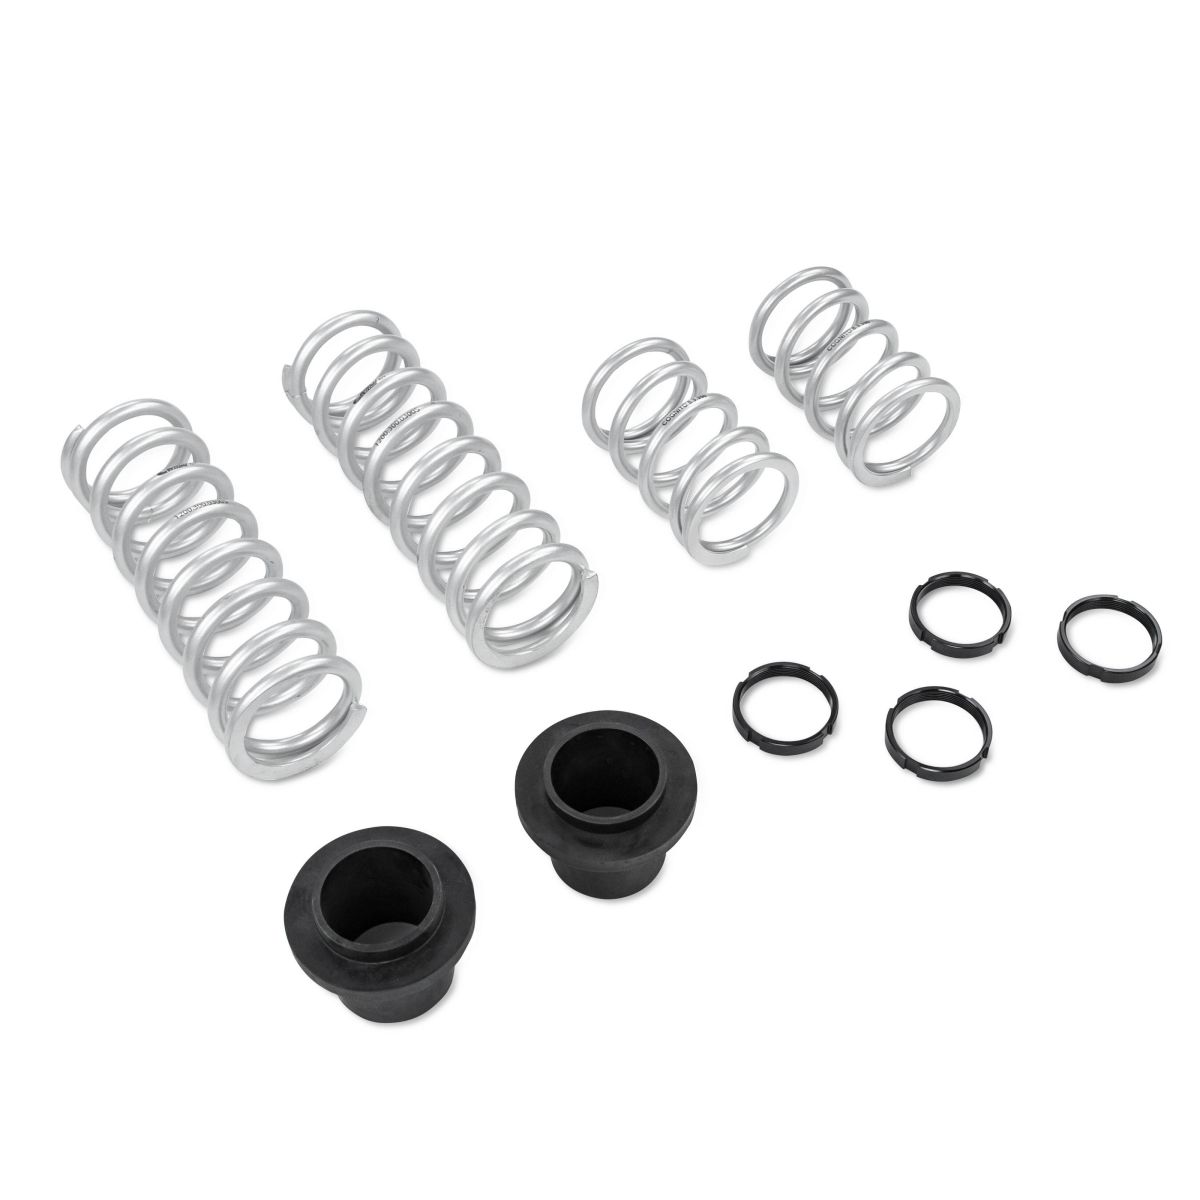 Cognito Motorsports - Cognito Front Spring Kit For OE Fox RC2 Shocks On 2016-2021 Yamaha YXZ1000R